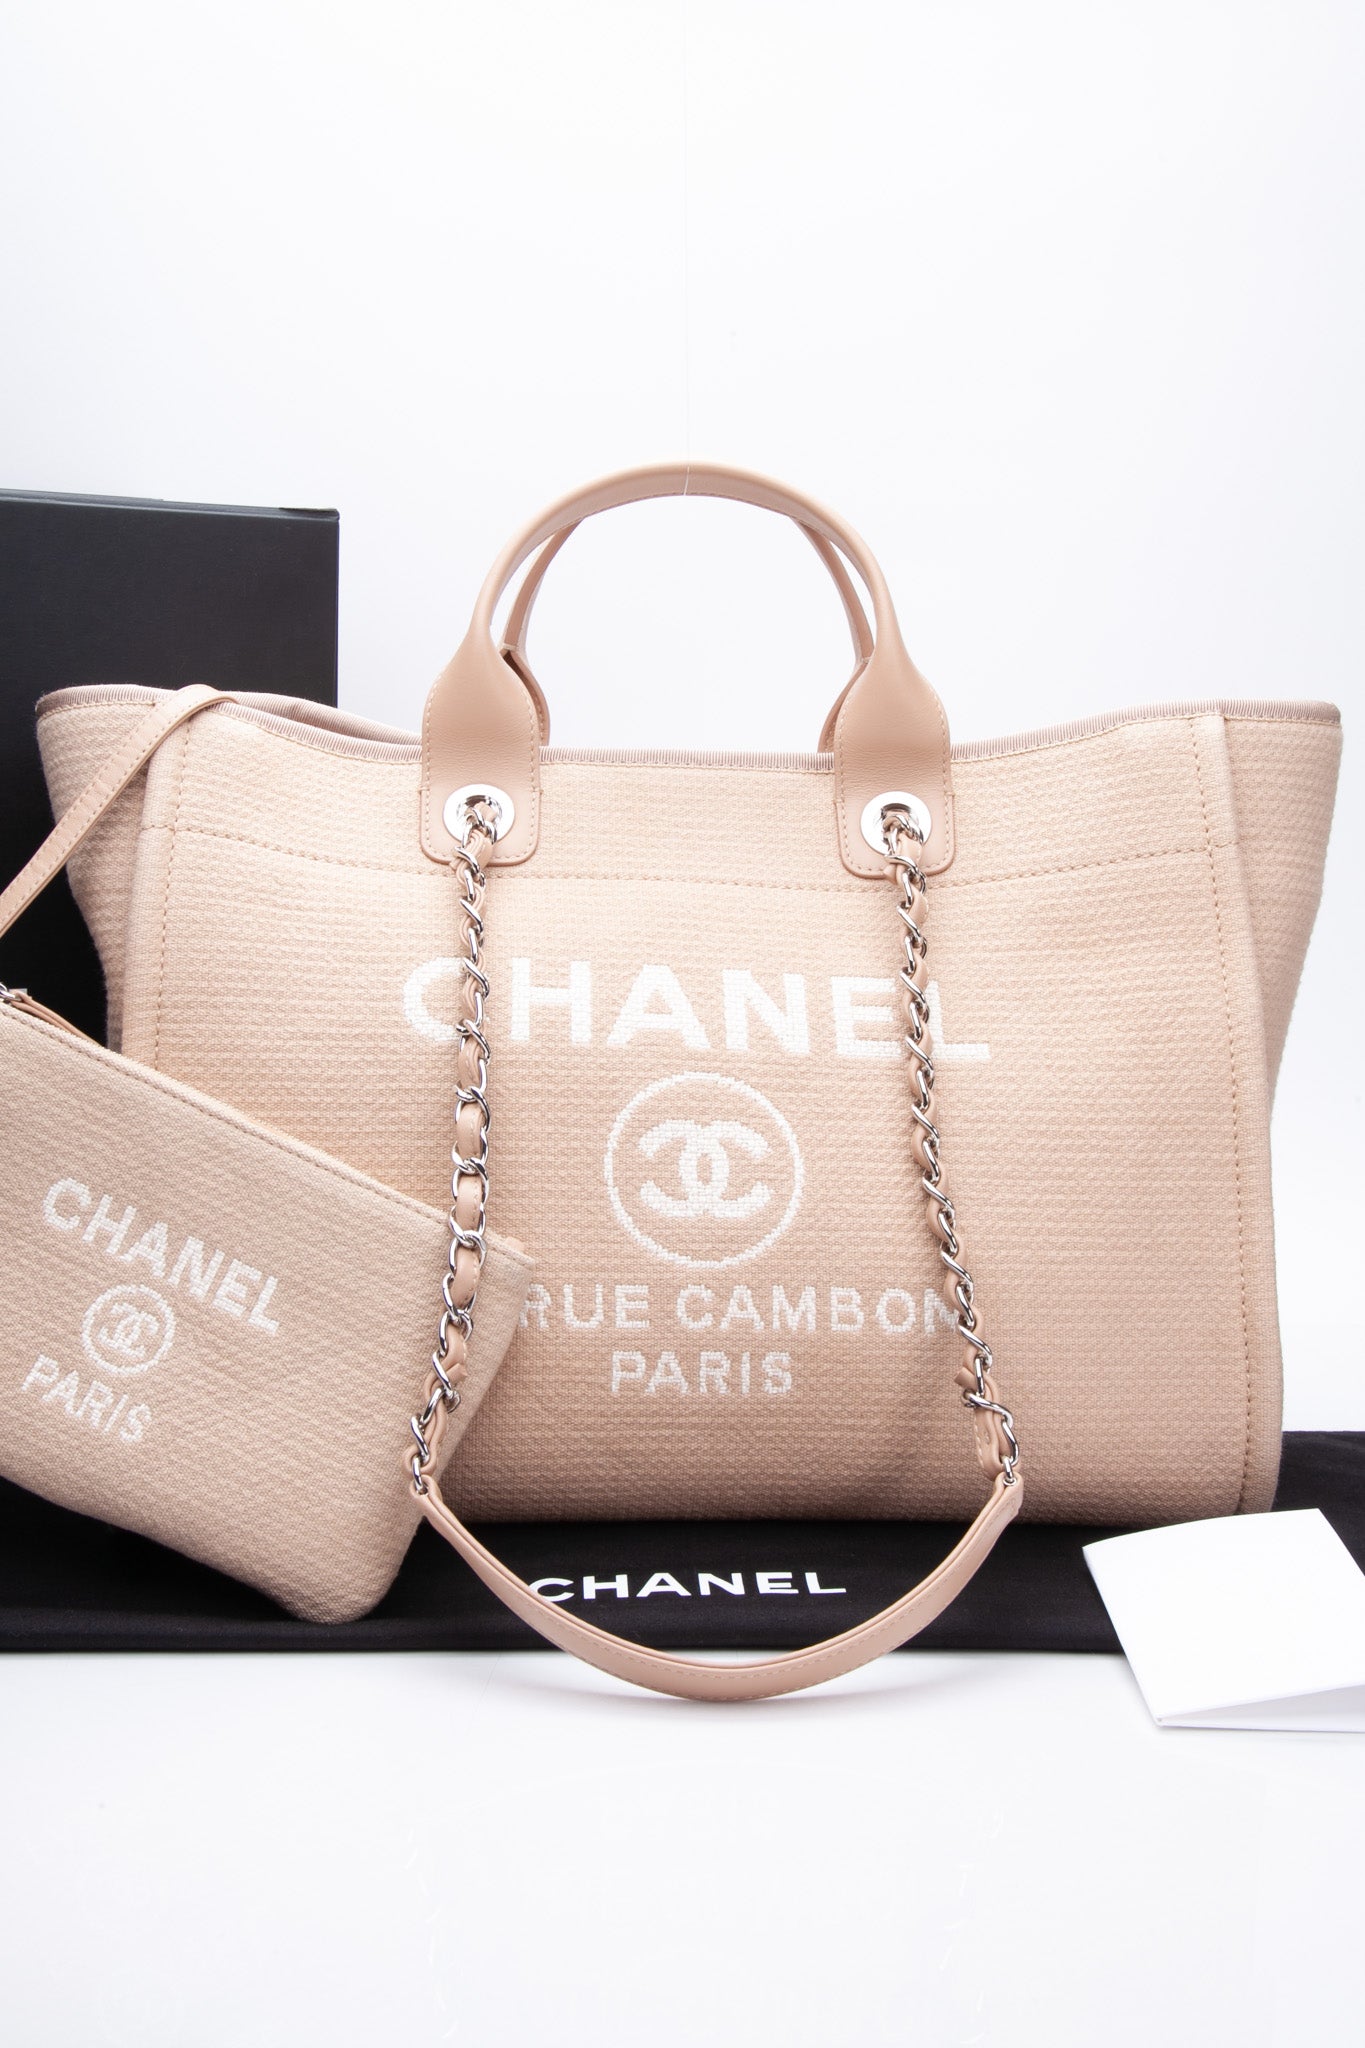 CHANEL Tan Canvas Leather Deauville Tote Shoulder Bag (Authentic Pre-Owned)